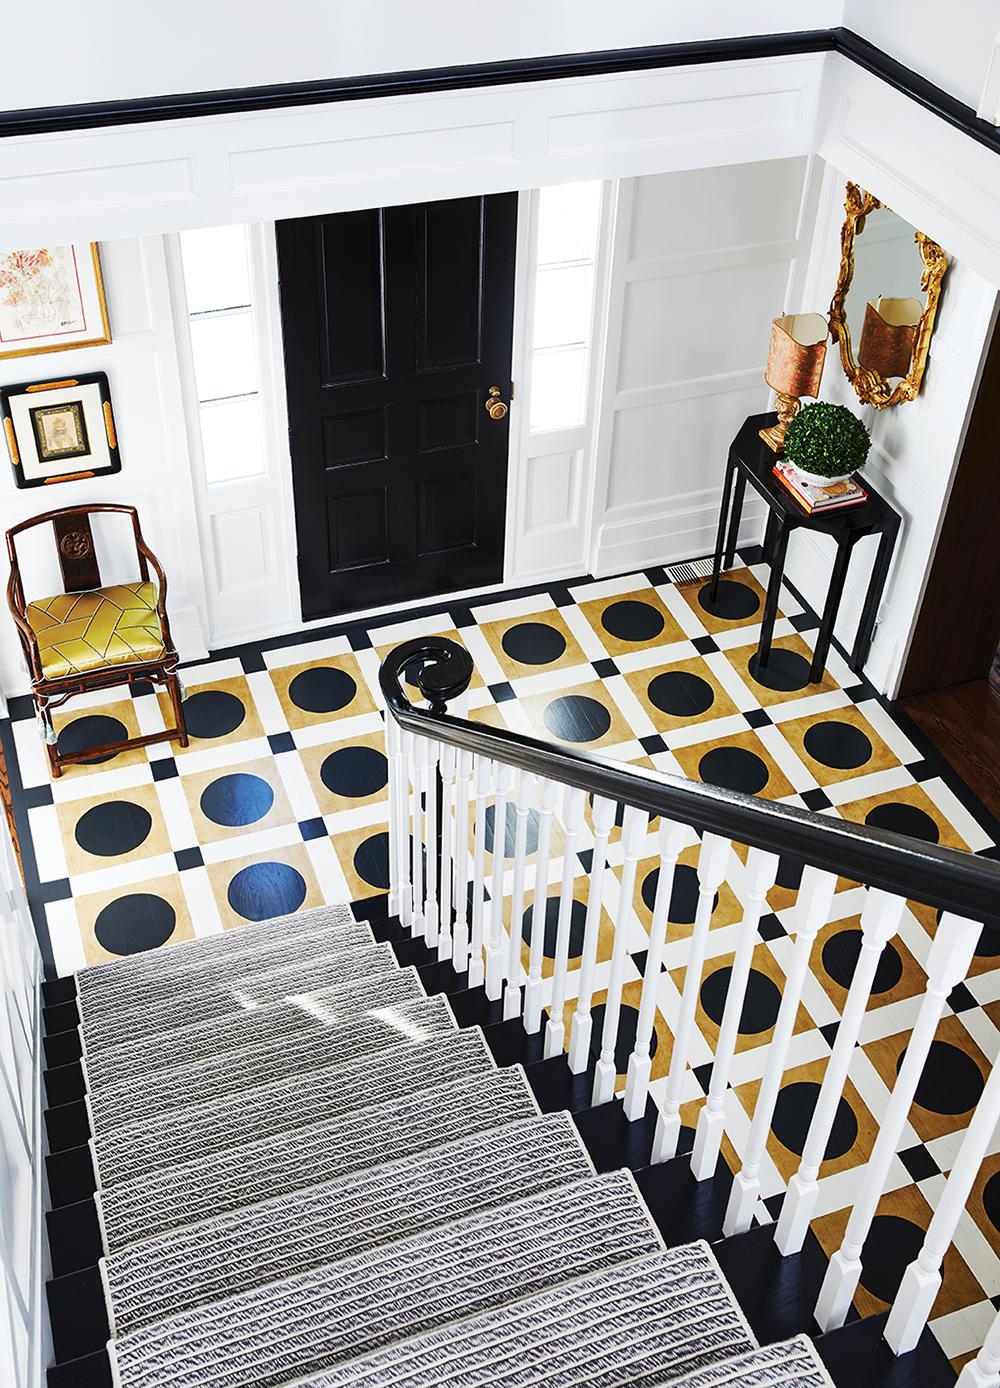 5 Things You Should Consider Before You Paint Your Floors